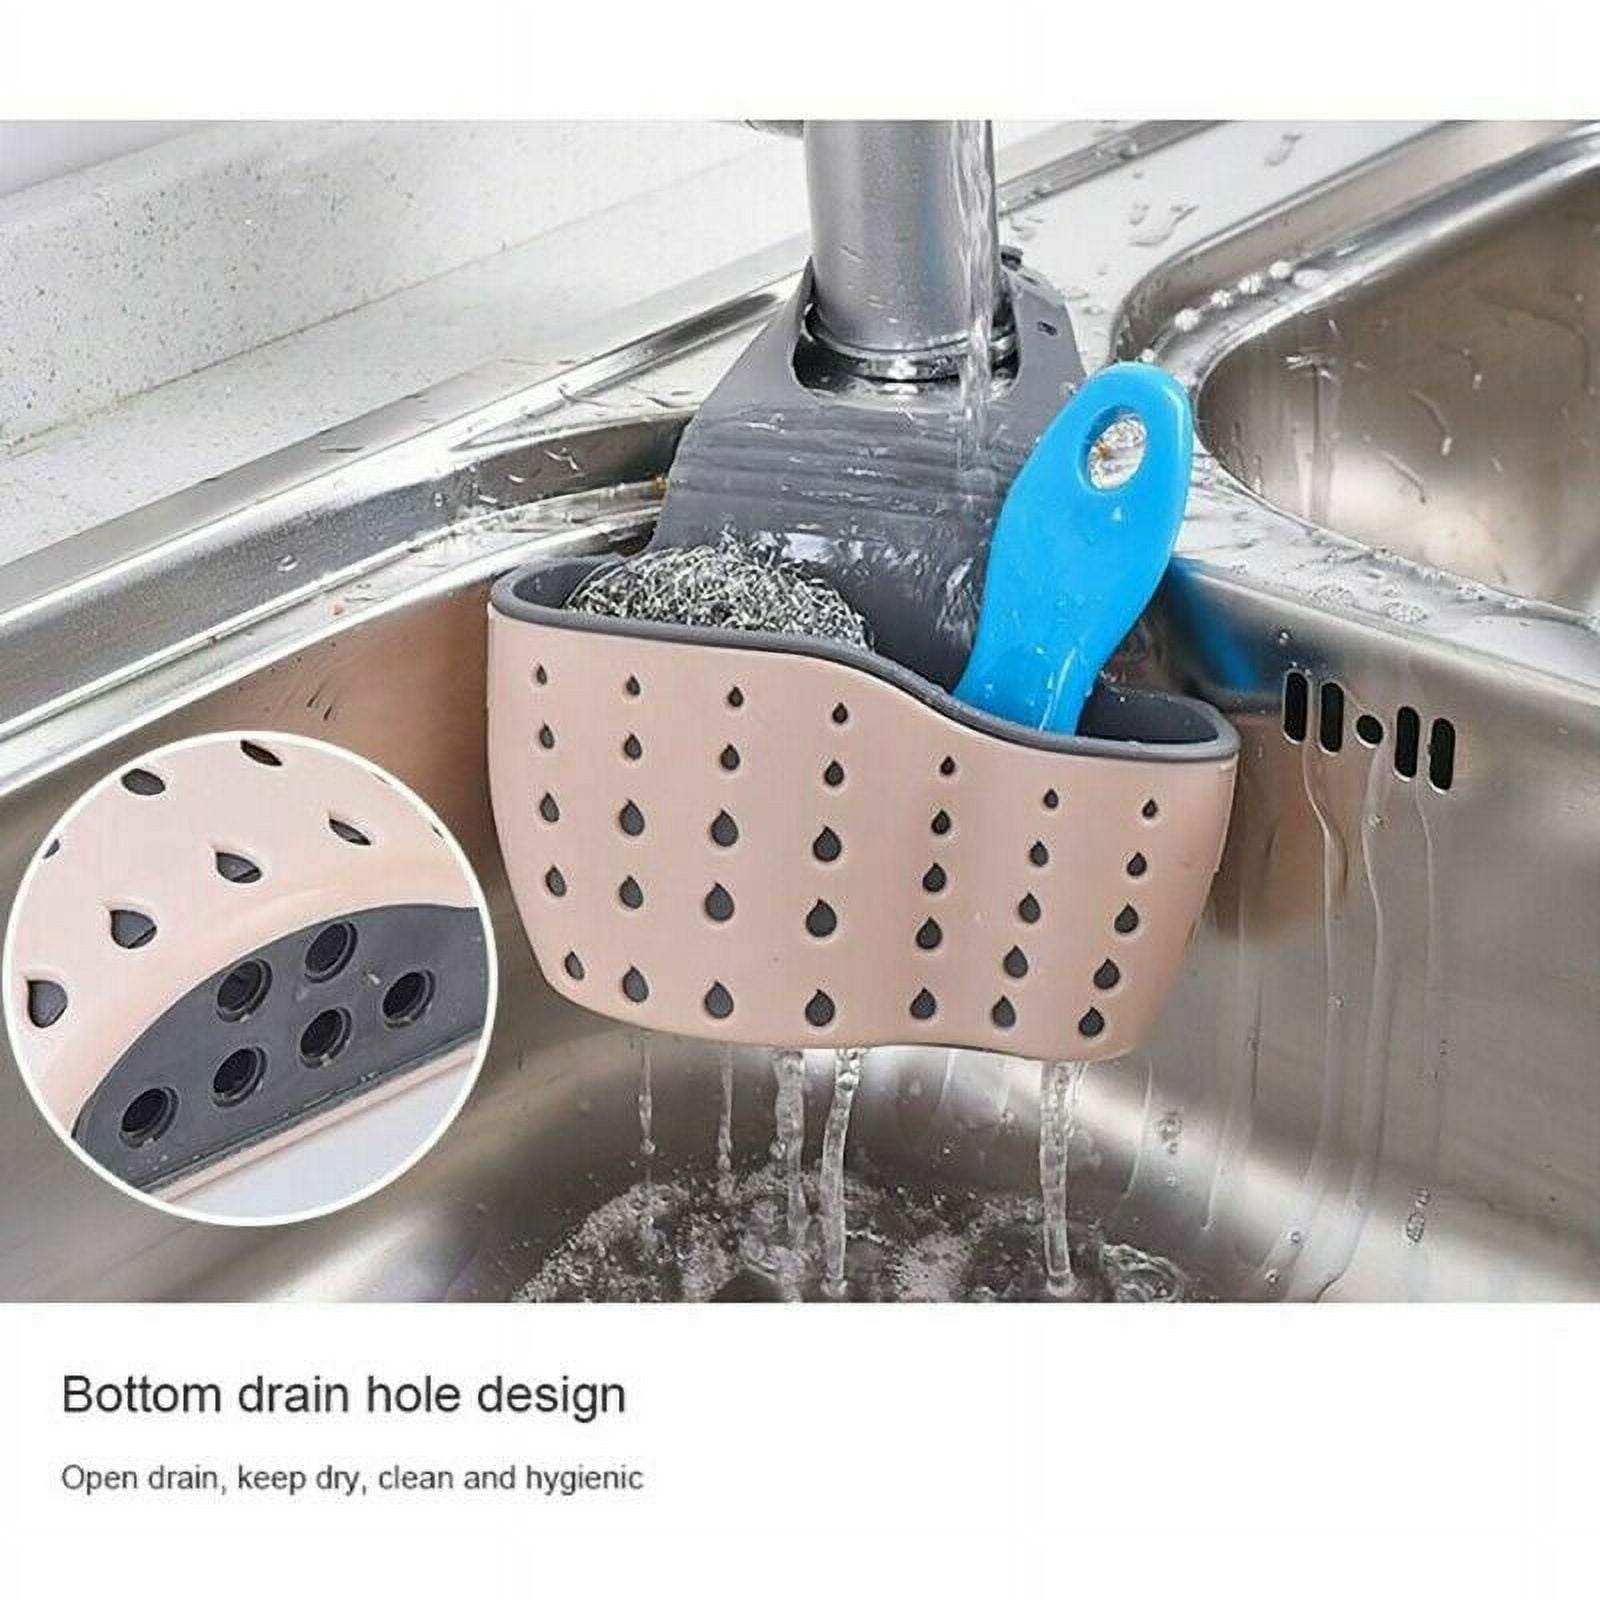 Aoibox 1 Pack Gray Sponge Holder for Kitchen Sink Adhesive Sponge Caddy Shower Shelf with Hooks Stuck No Drilling